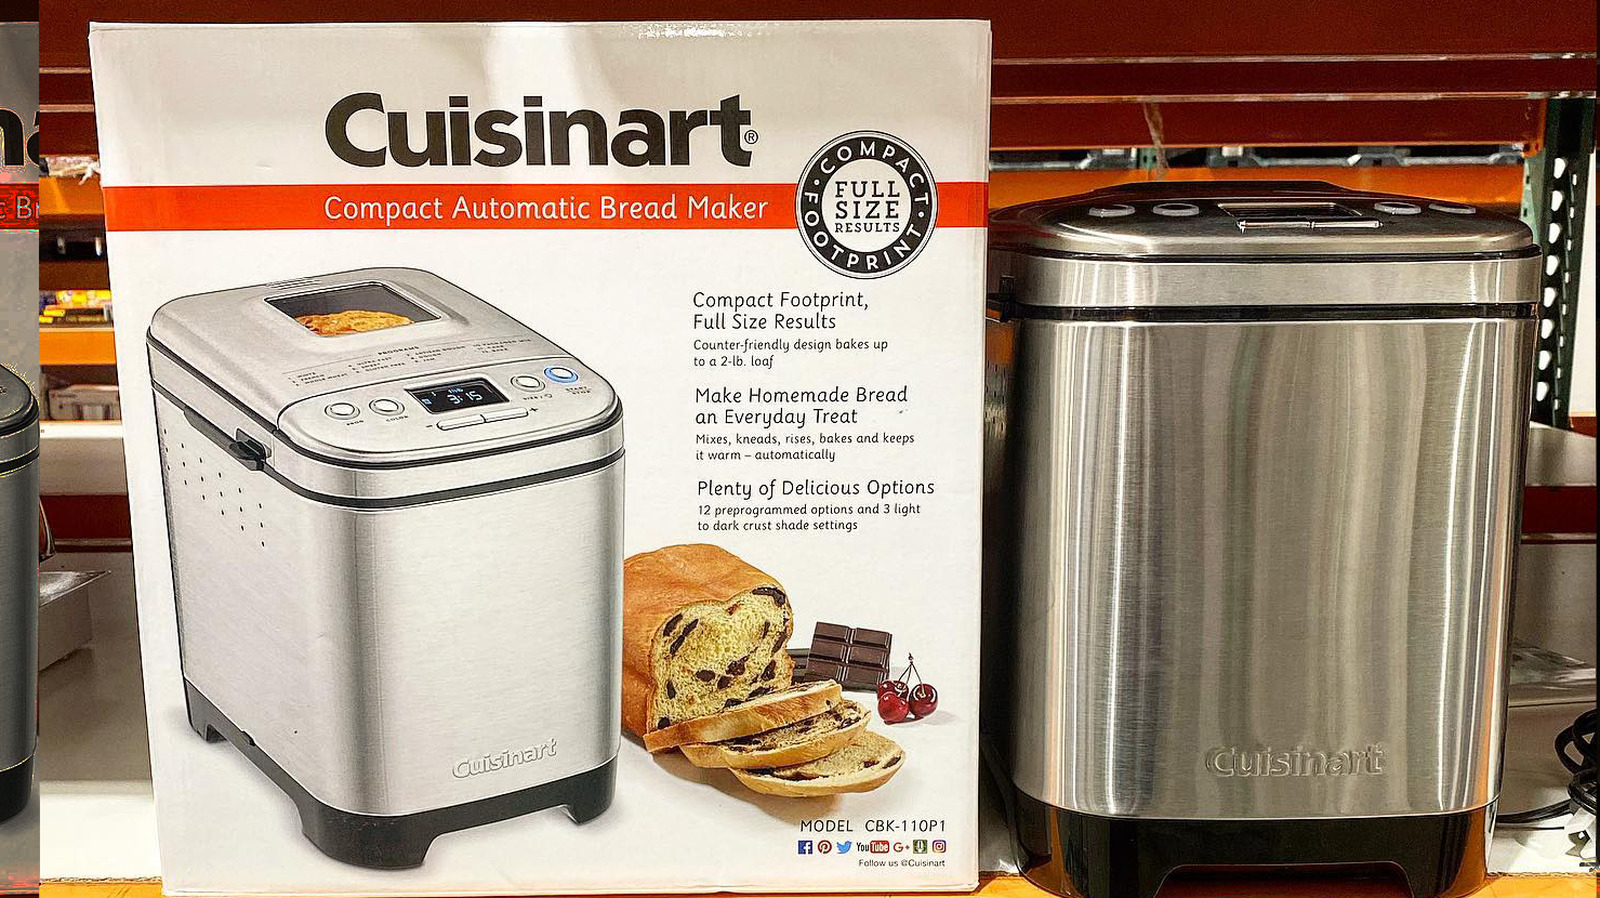 This Cuisinart Bread Maker On Sale At Costco Is A Total Steal